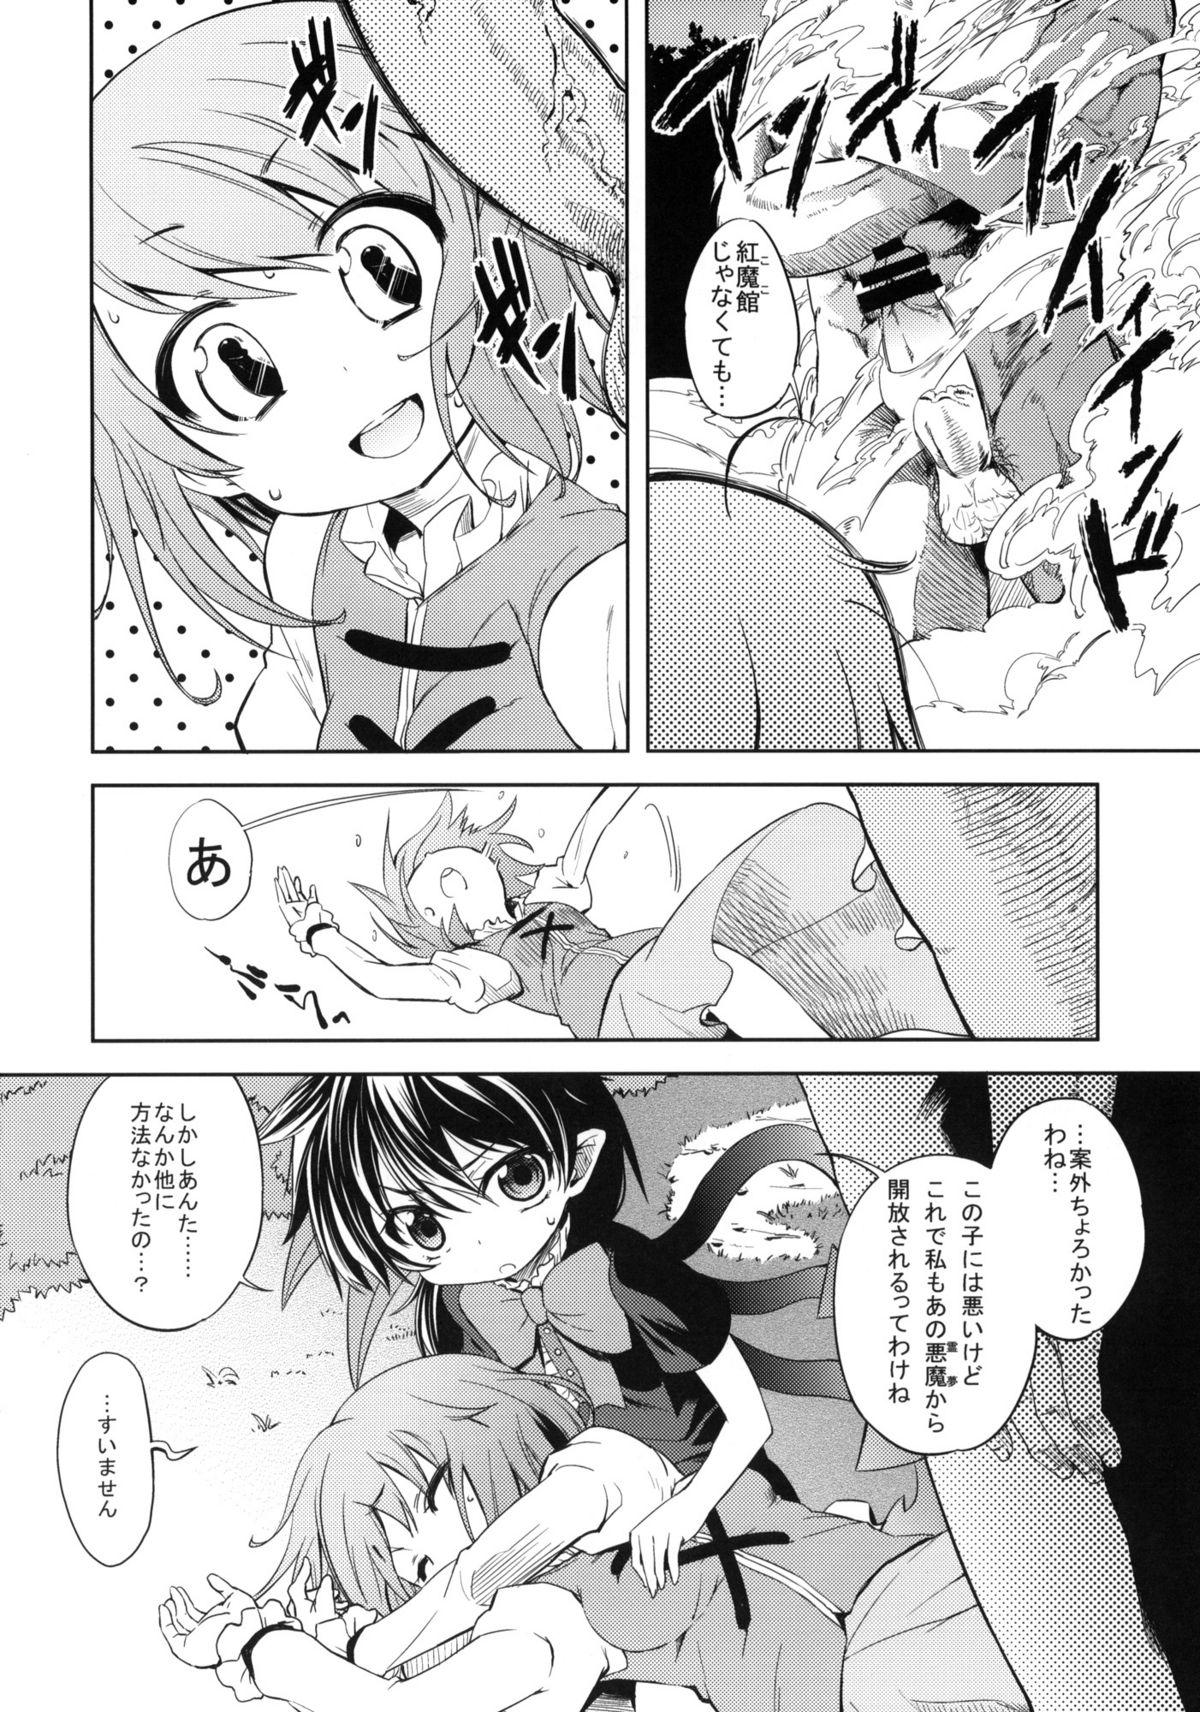 Nudes WITH YOUR SMILE - Touhou project Pounding - Page 5